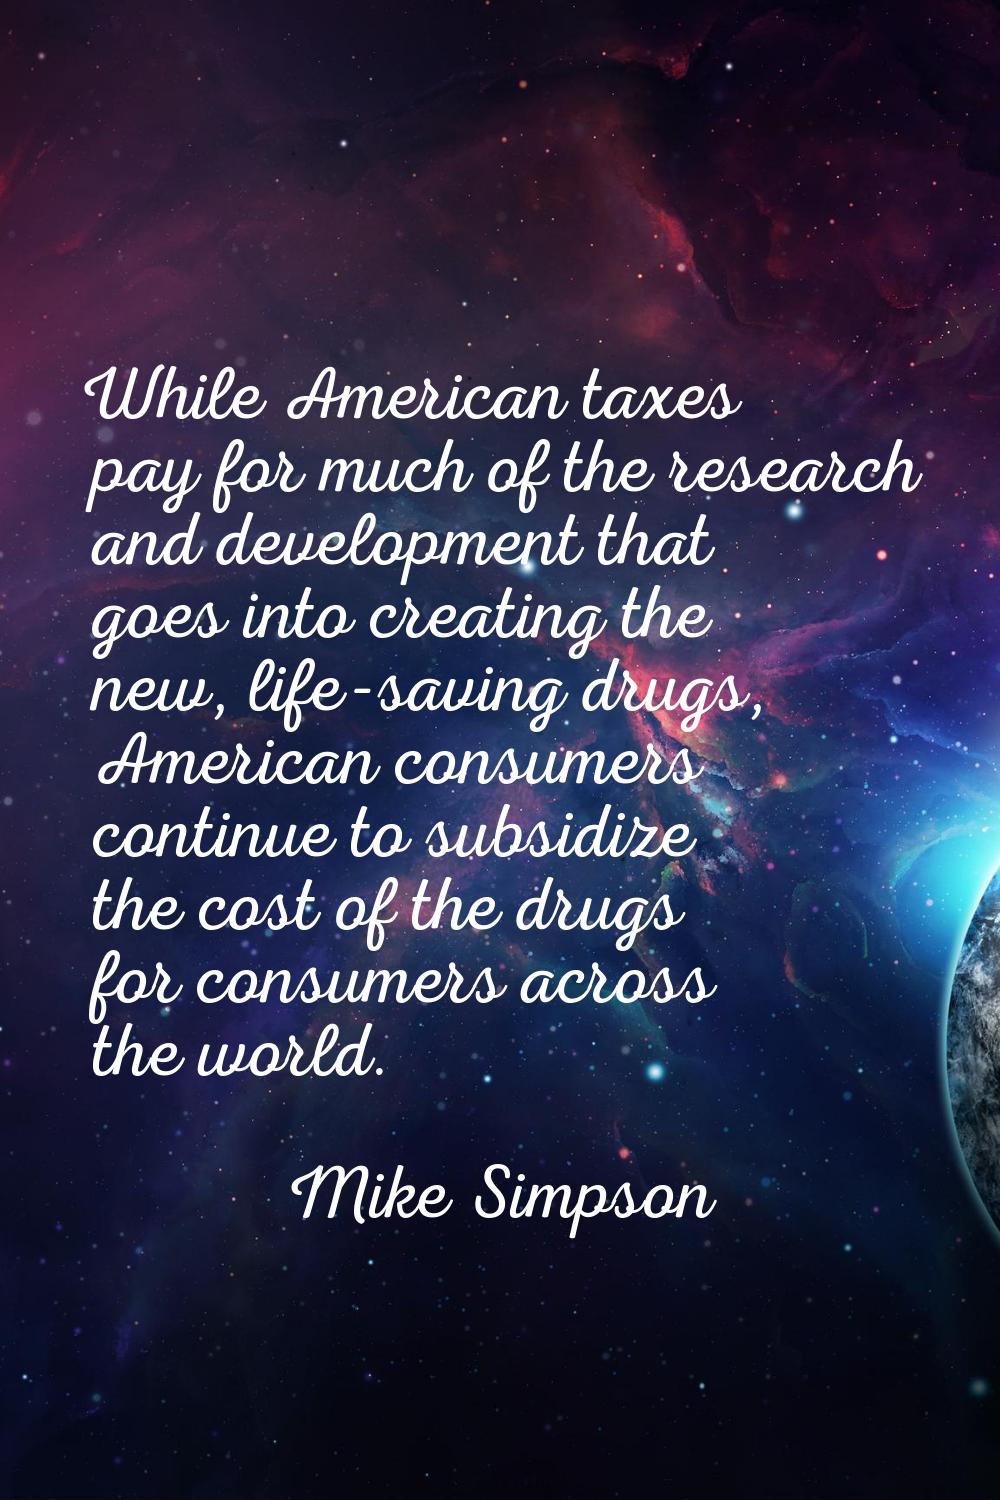 While American taxes pay for much of the research and development that goes into creating the new, 